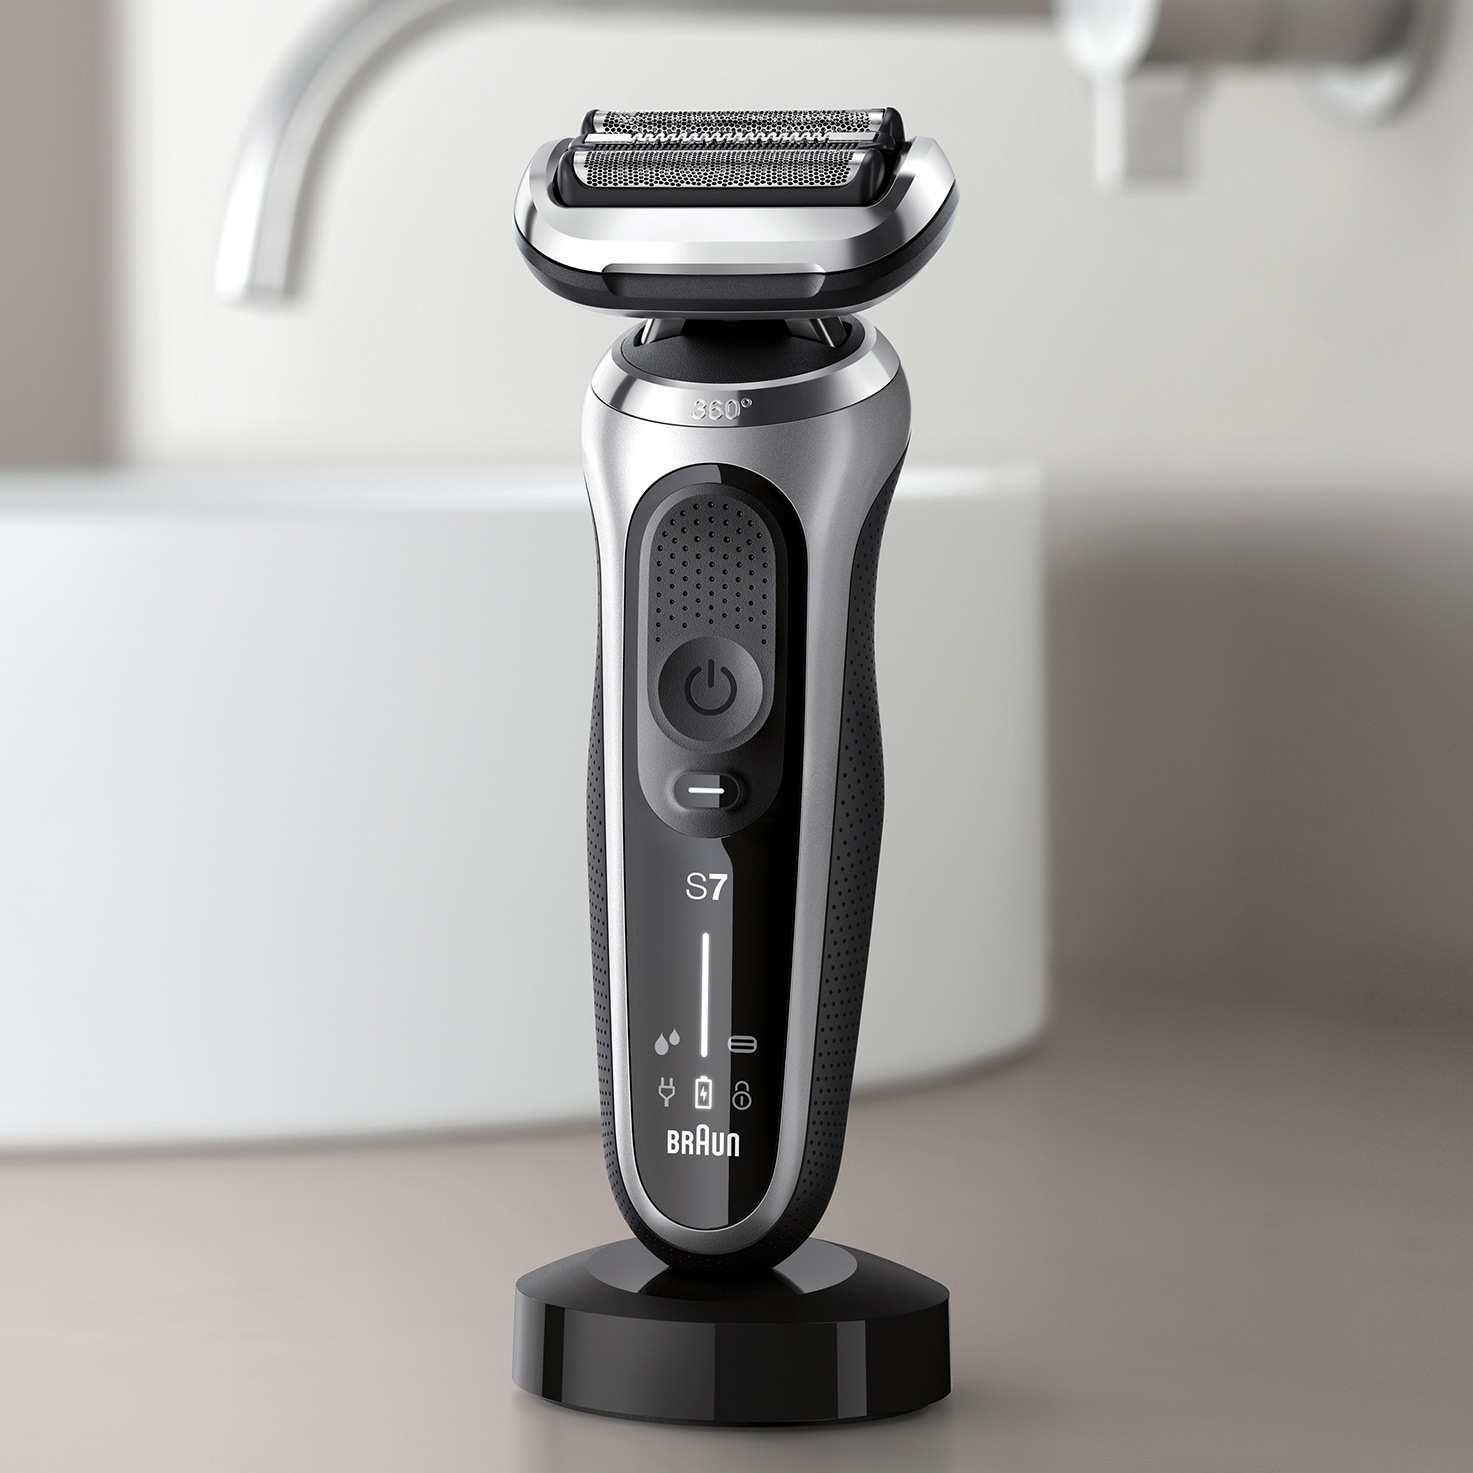 Charging Stand for Braun Series 5, 6 and 7 electric shaver (New generation)